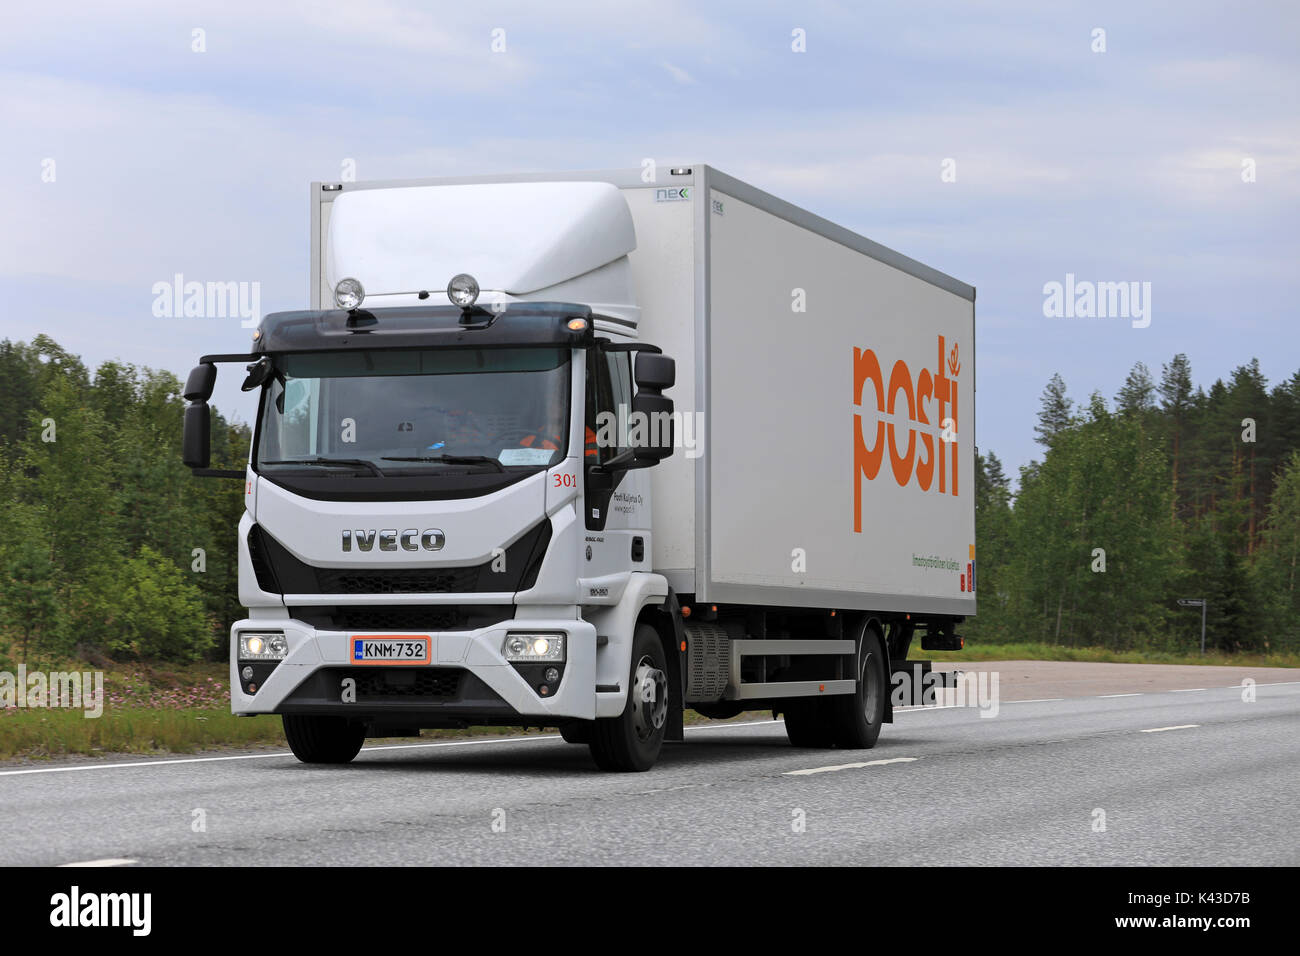 KUORTANE, FINLAND - AUGUST 12, 2017: White Iveco Eurocargo 120-250 delivery truck of Posti Kuljetus Oy on the road. The fourth generation Iveco Euroca Stock Photo